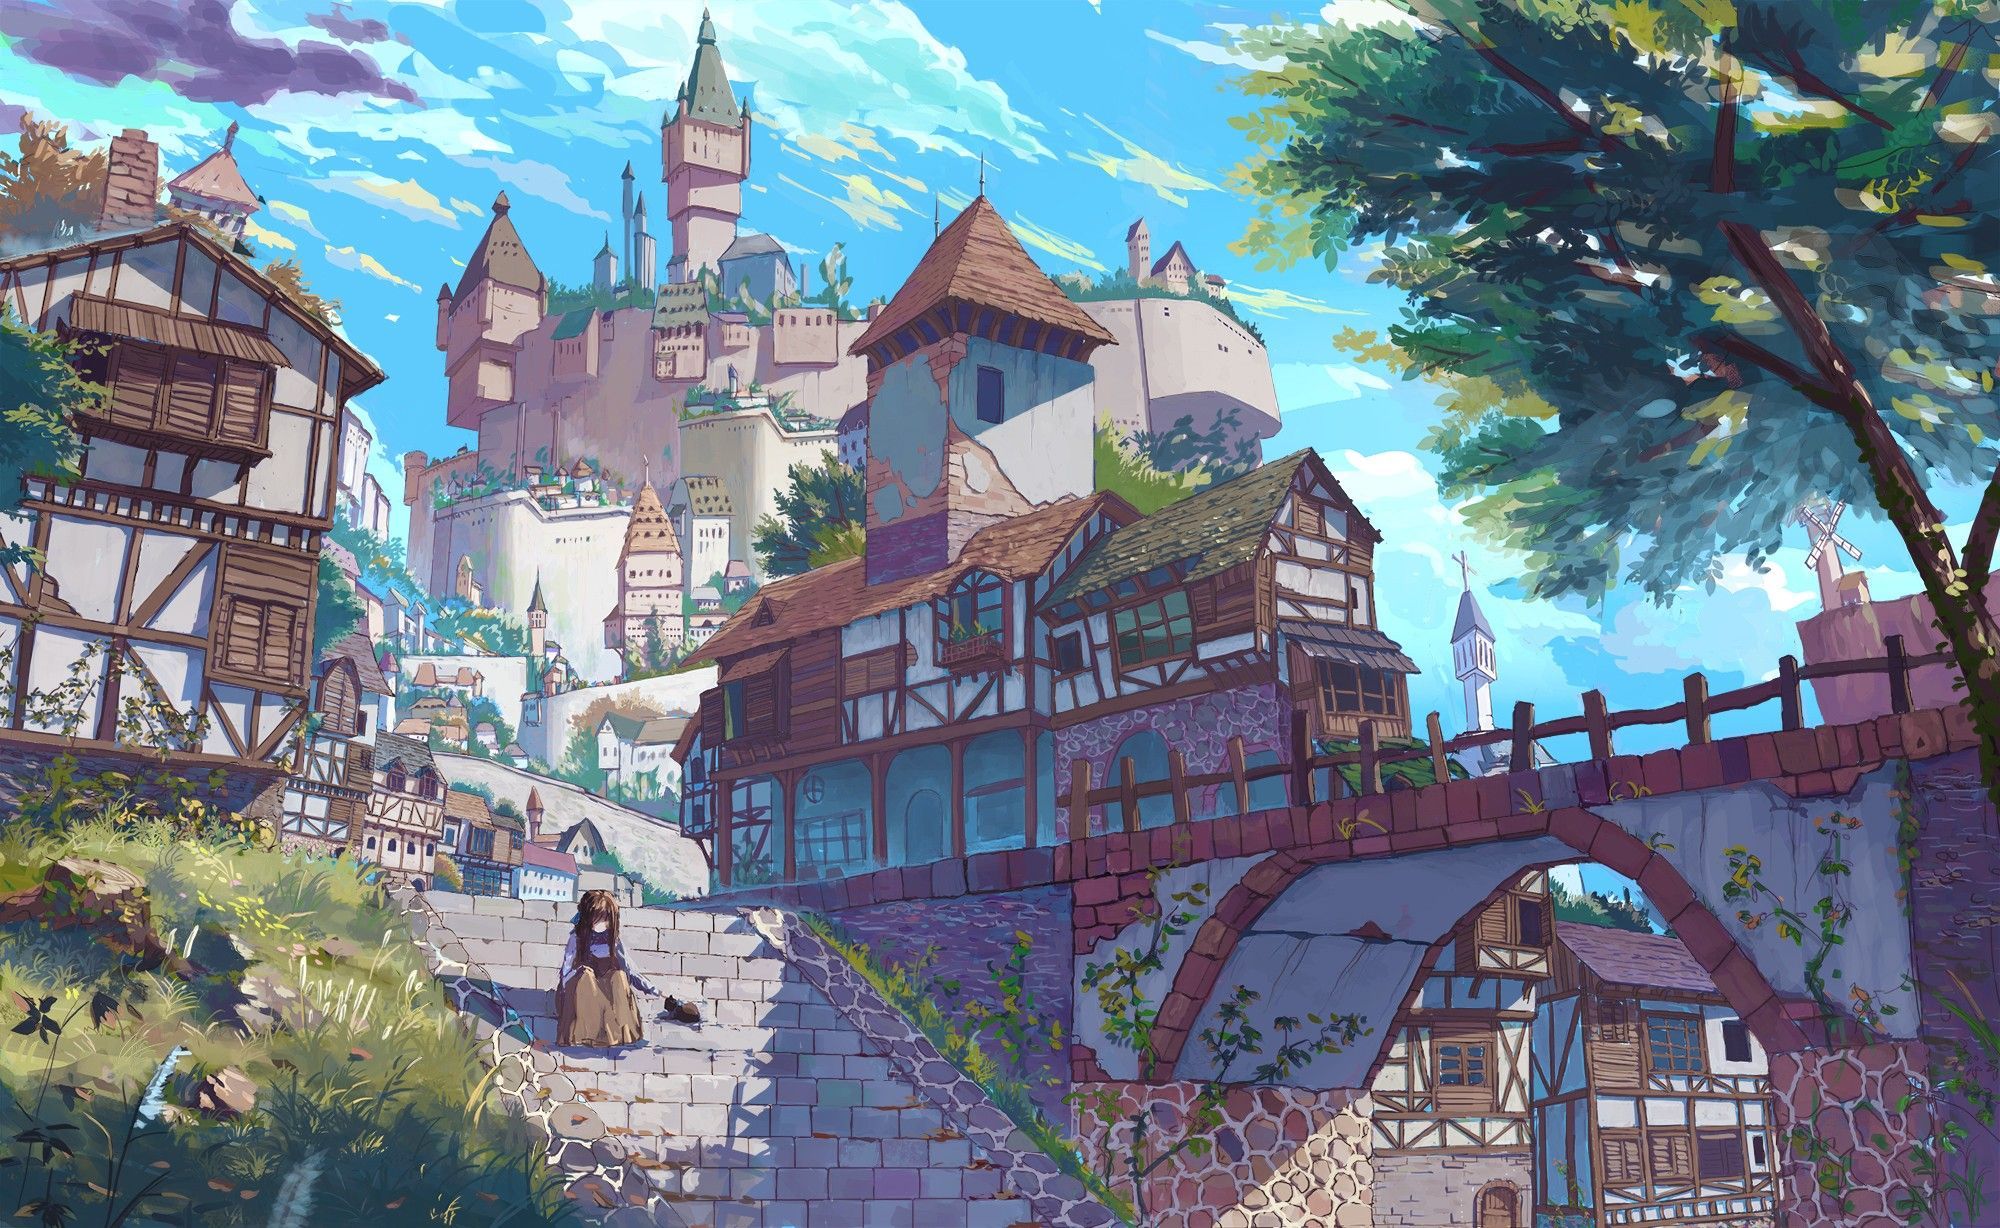 Japanese Anime Town Landscape Wallpapers - Wallpaper Cave